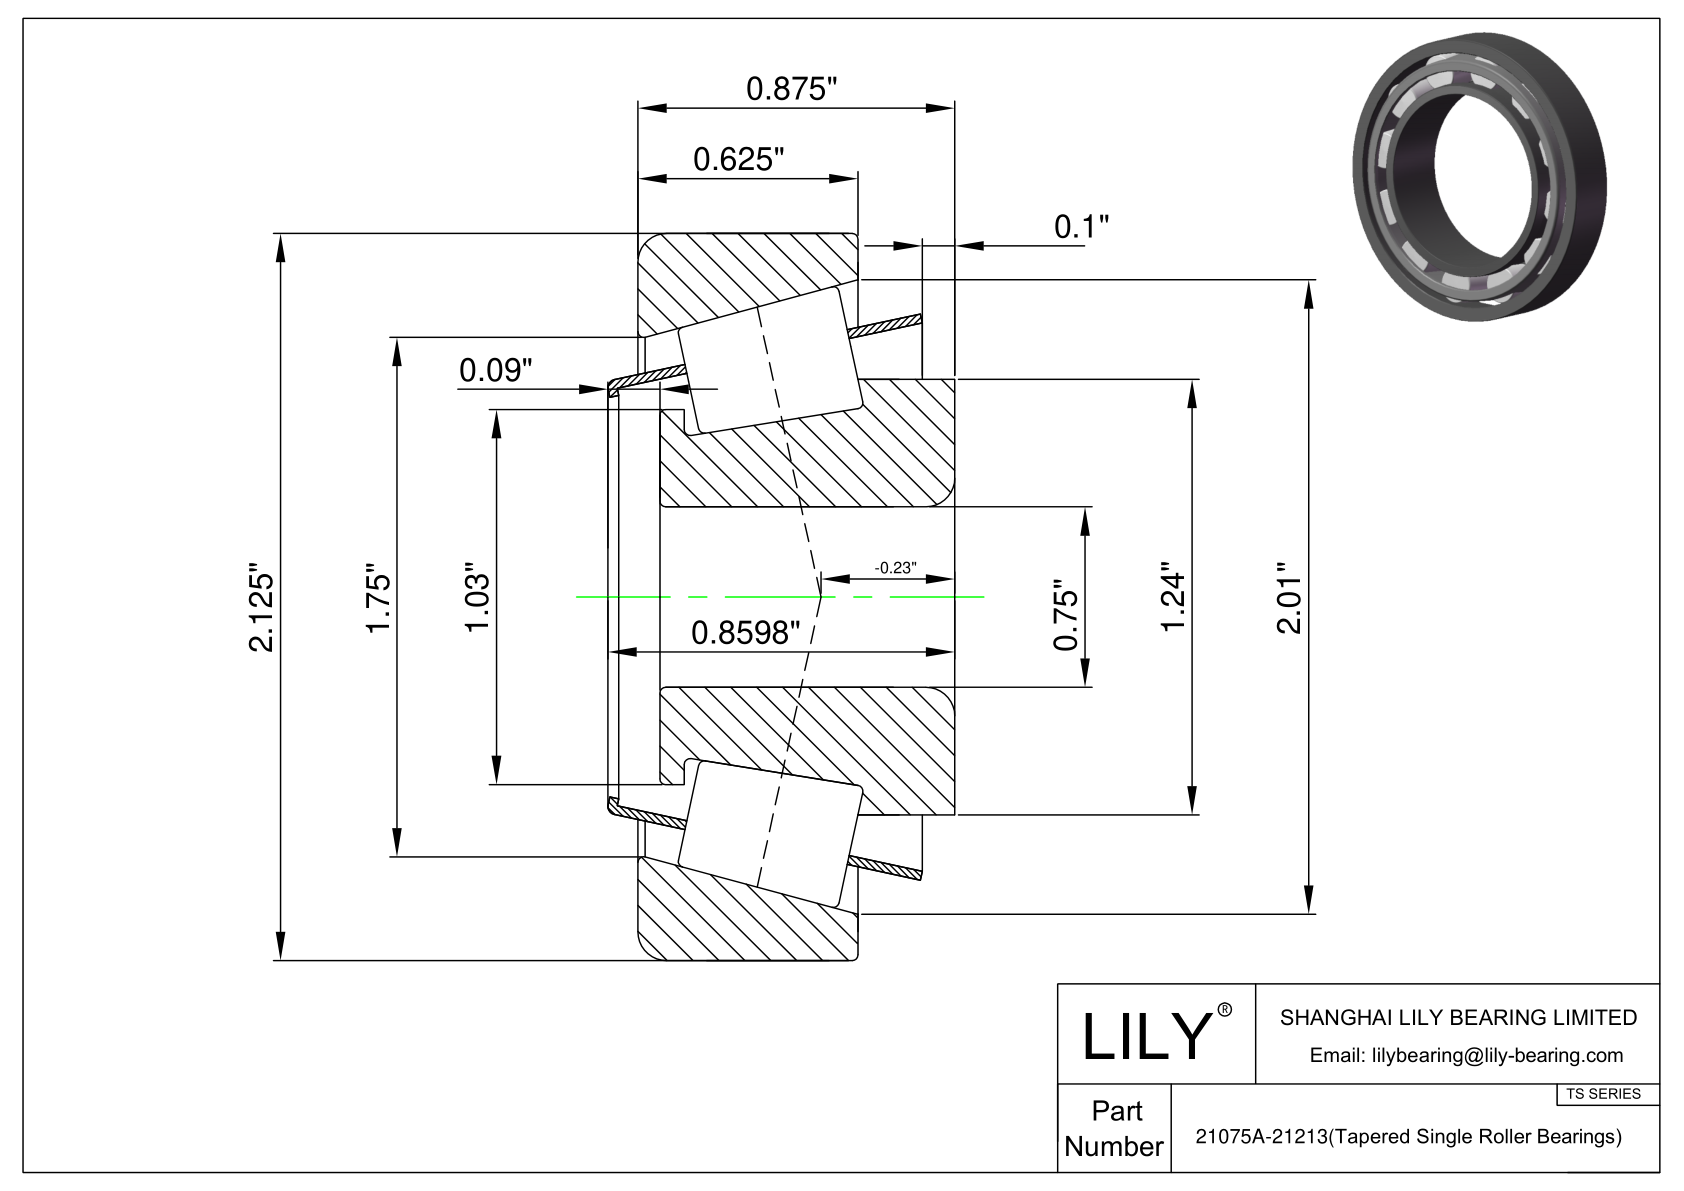 21075A-21213 TS (Tapered Single Roller Bearings) (Imperial) cad drawing